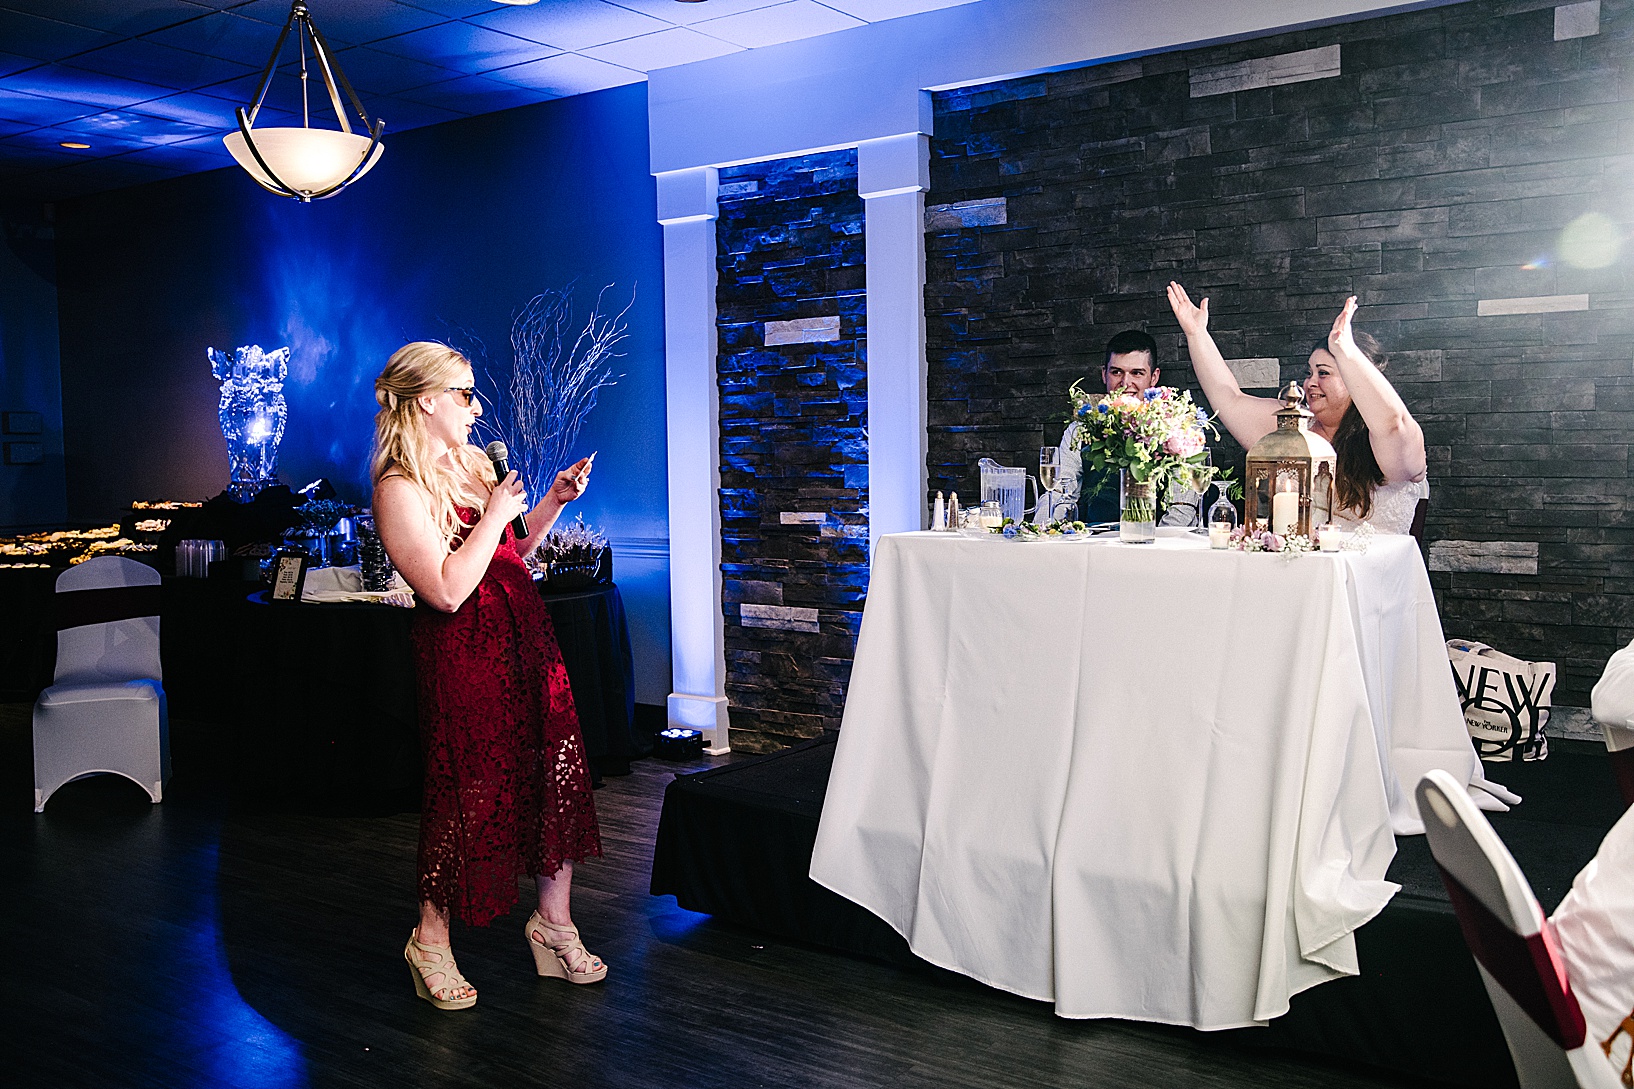 Bride claps with laughter as bridesmaid gives her speech wearing sunglasses